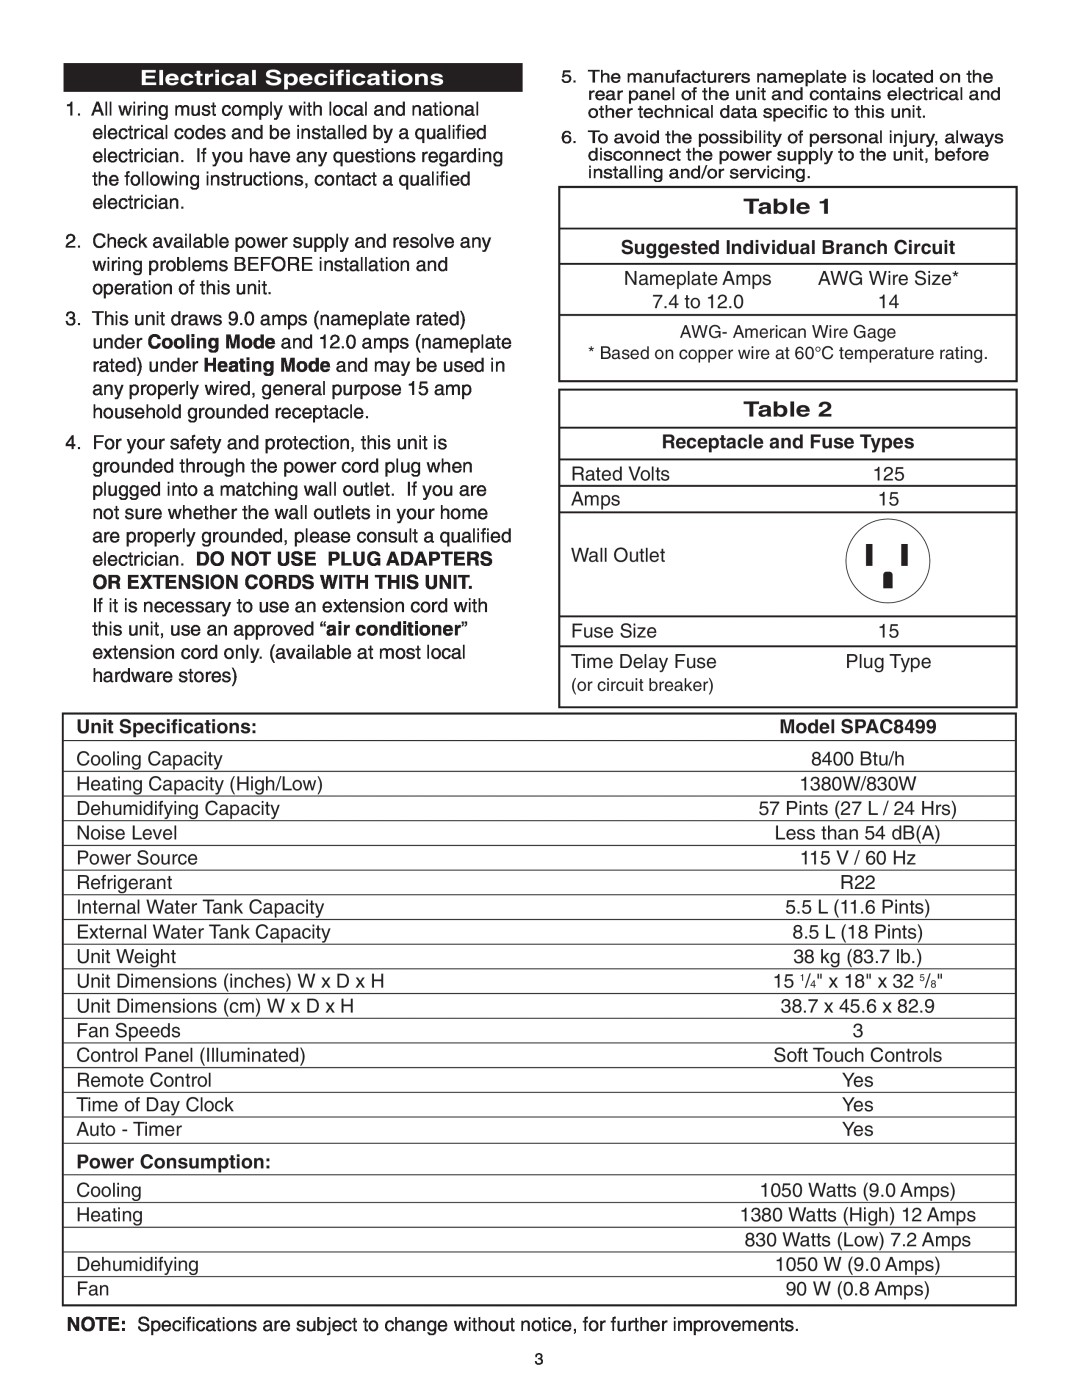 Danby manual Electrical Specifications, Table, Suggested Individual Branch Circuit, Unit Specifications, Model SPAC8499 